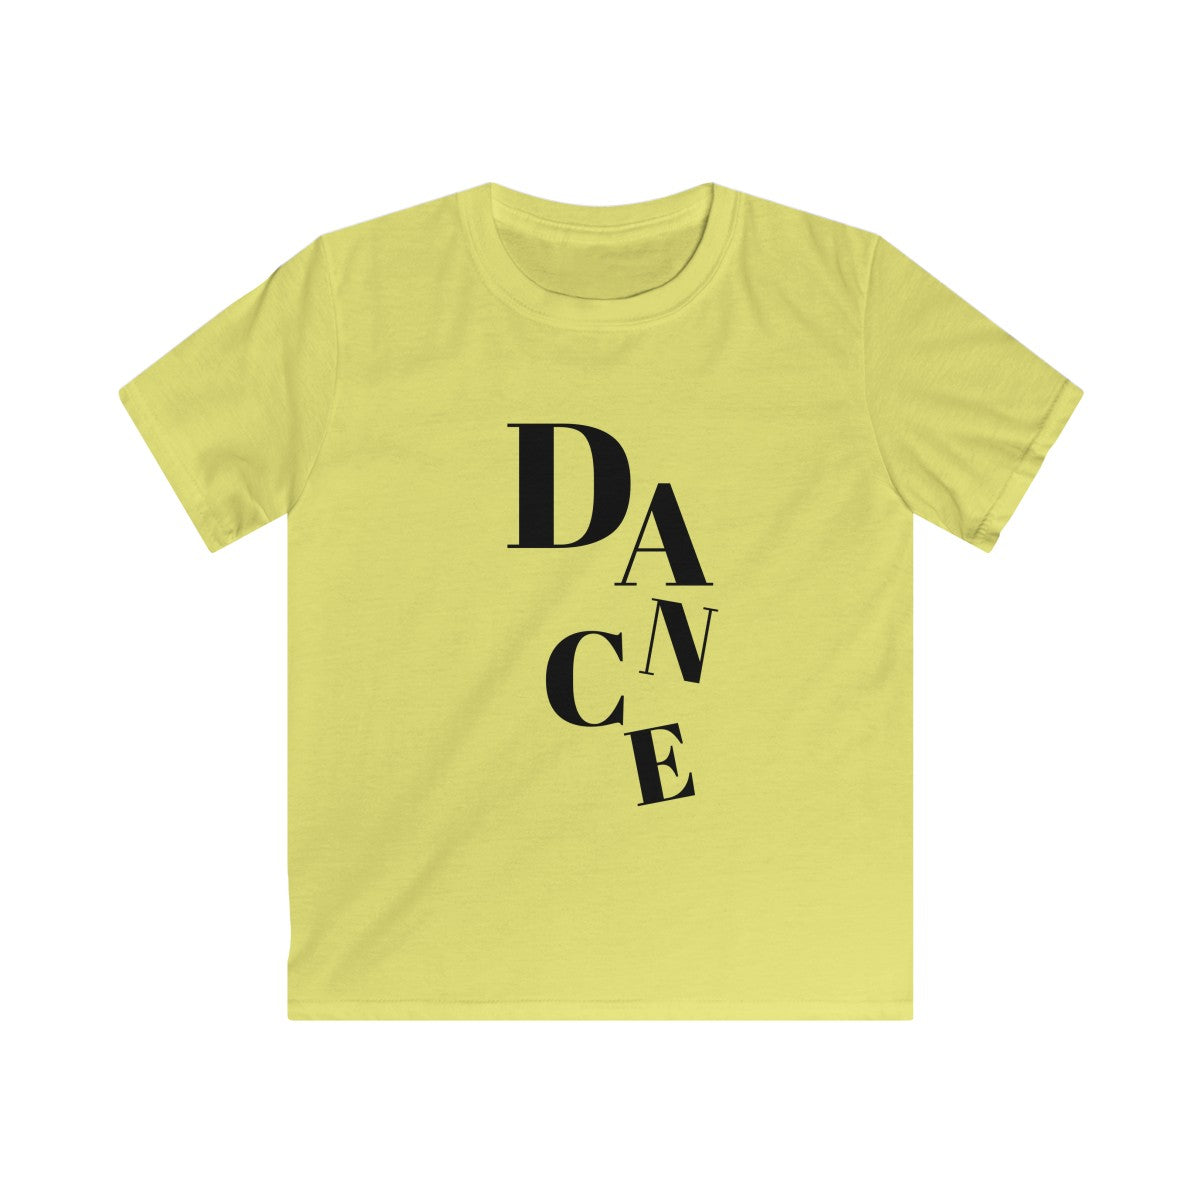 Kids Softstyle Dance Tee - SD-style-shop